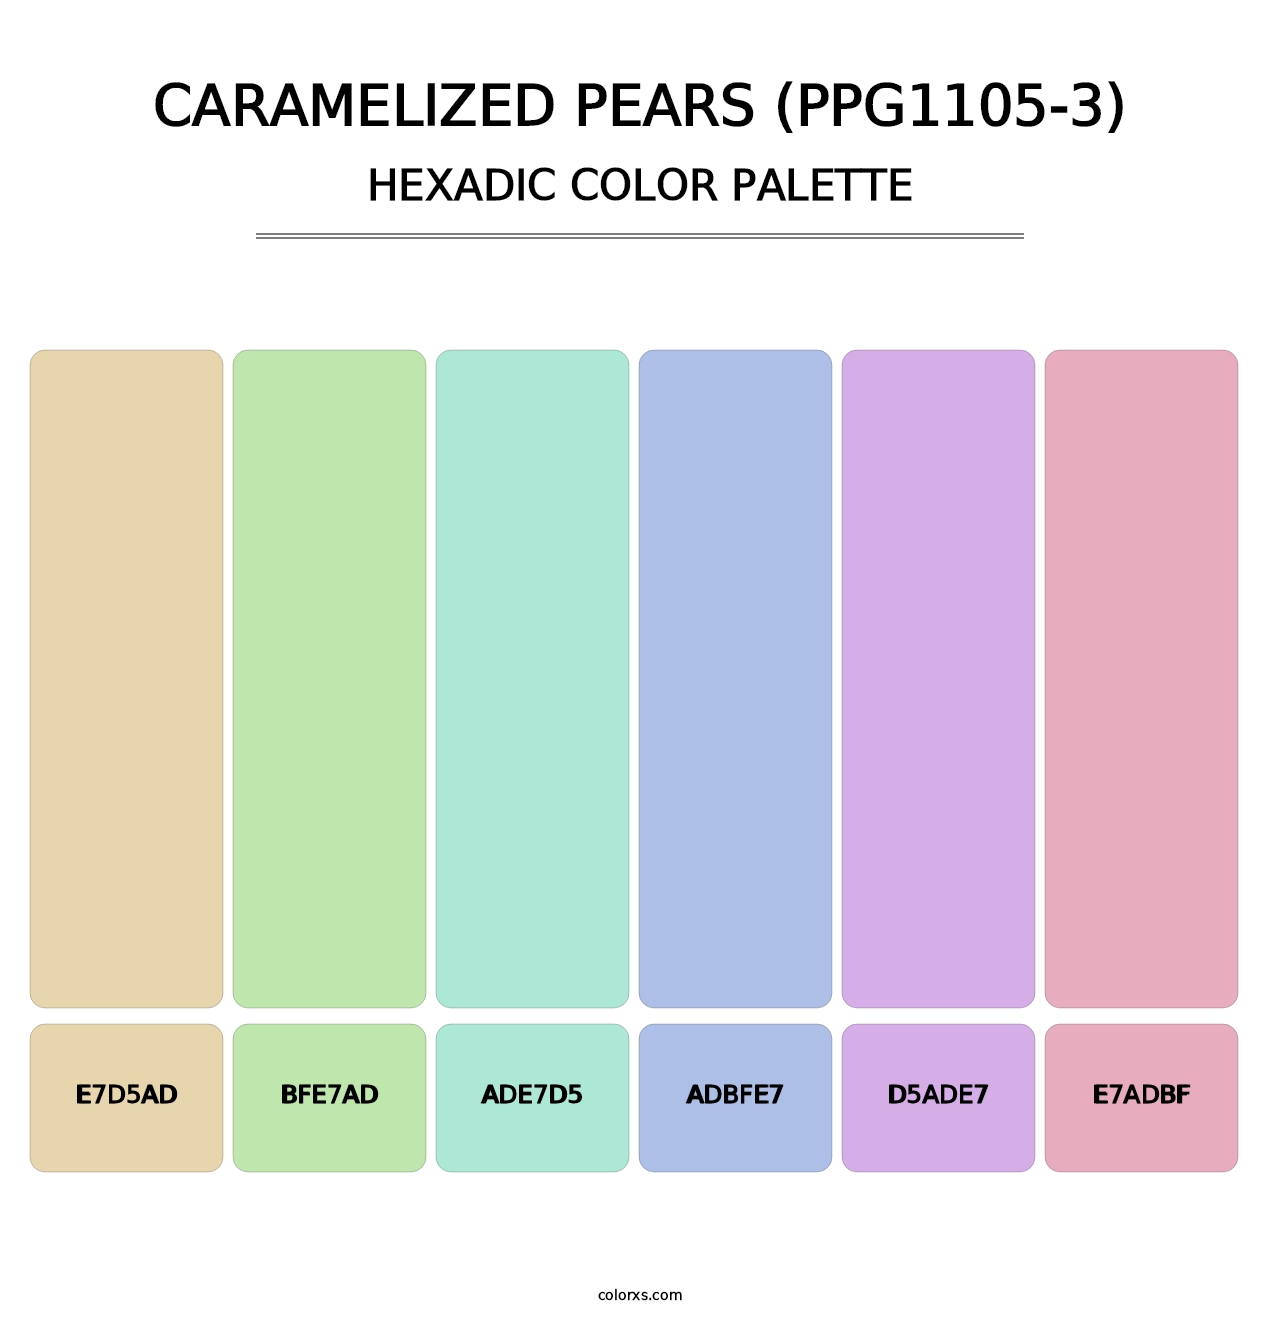 Caramelized Pears (PPG1105-3) - Hexadic Color Palette